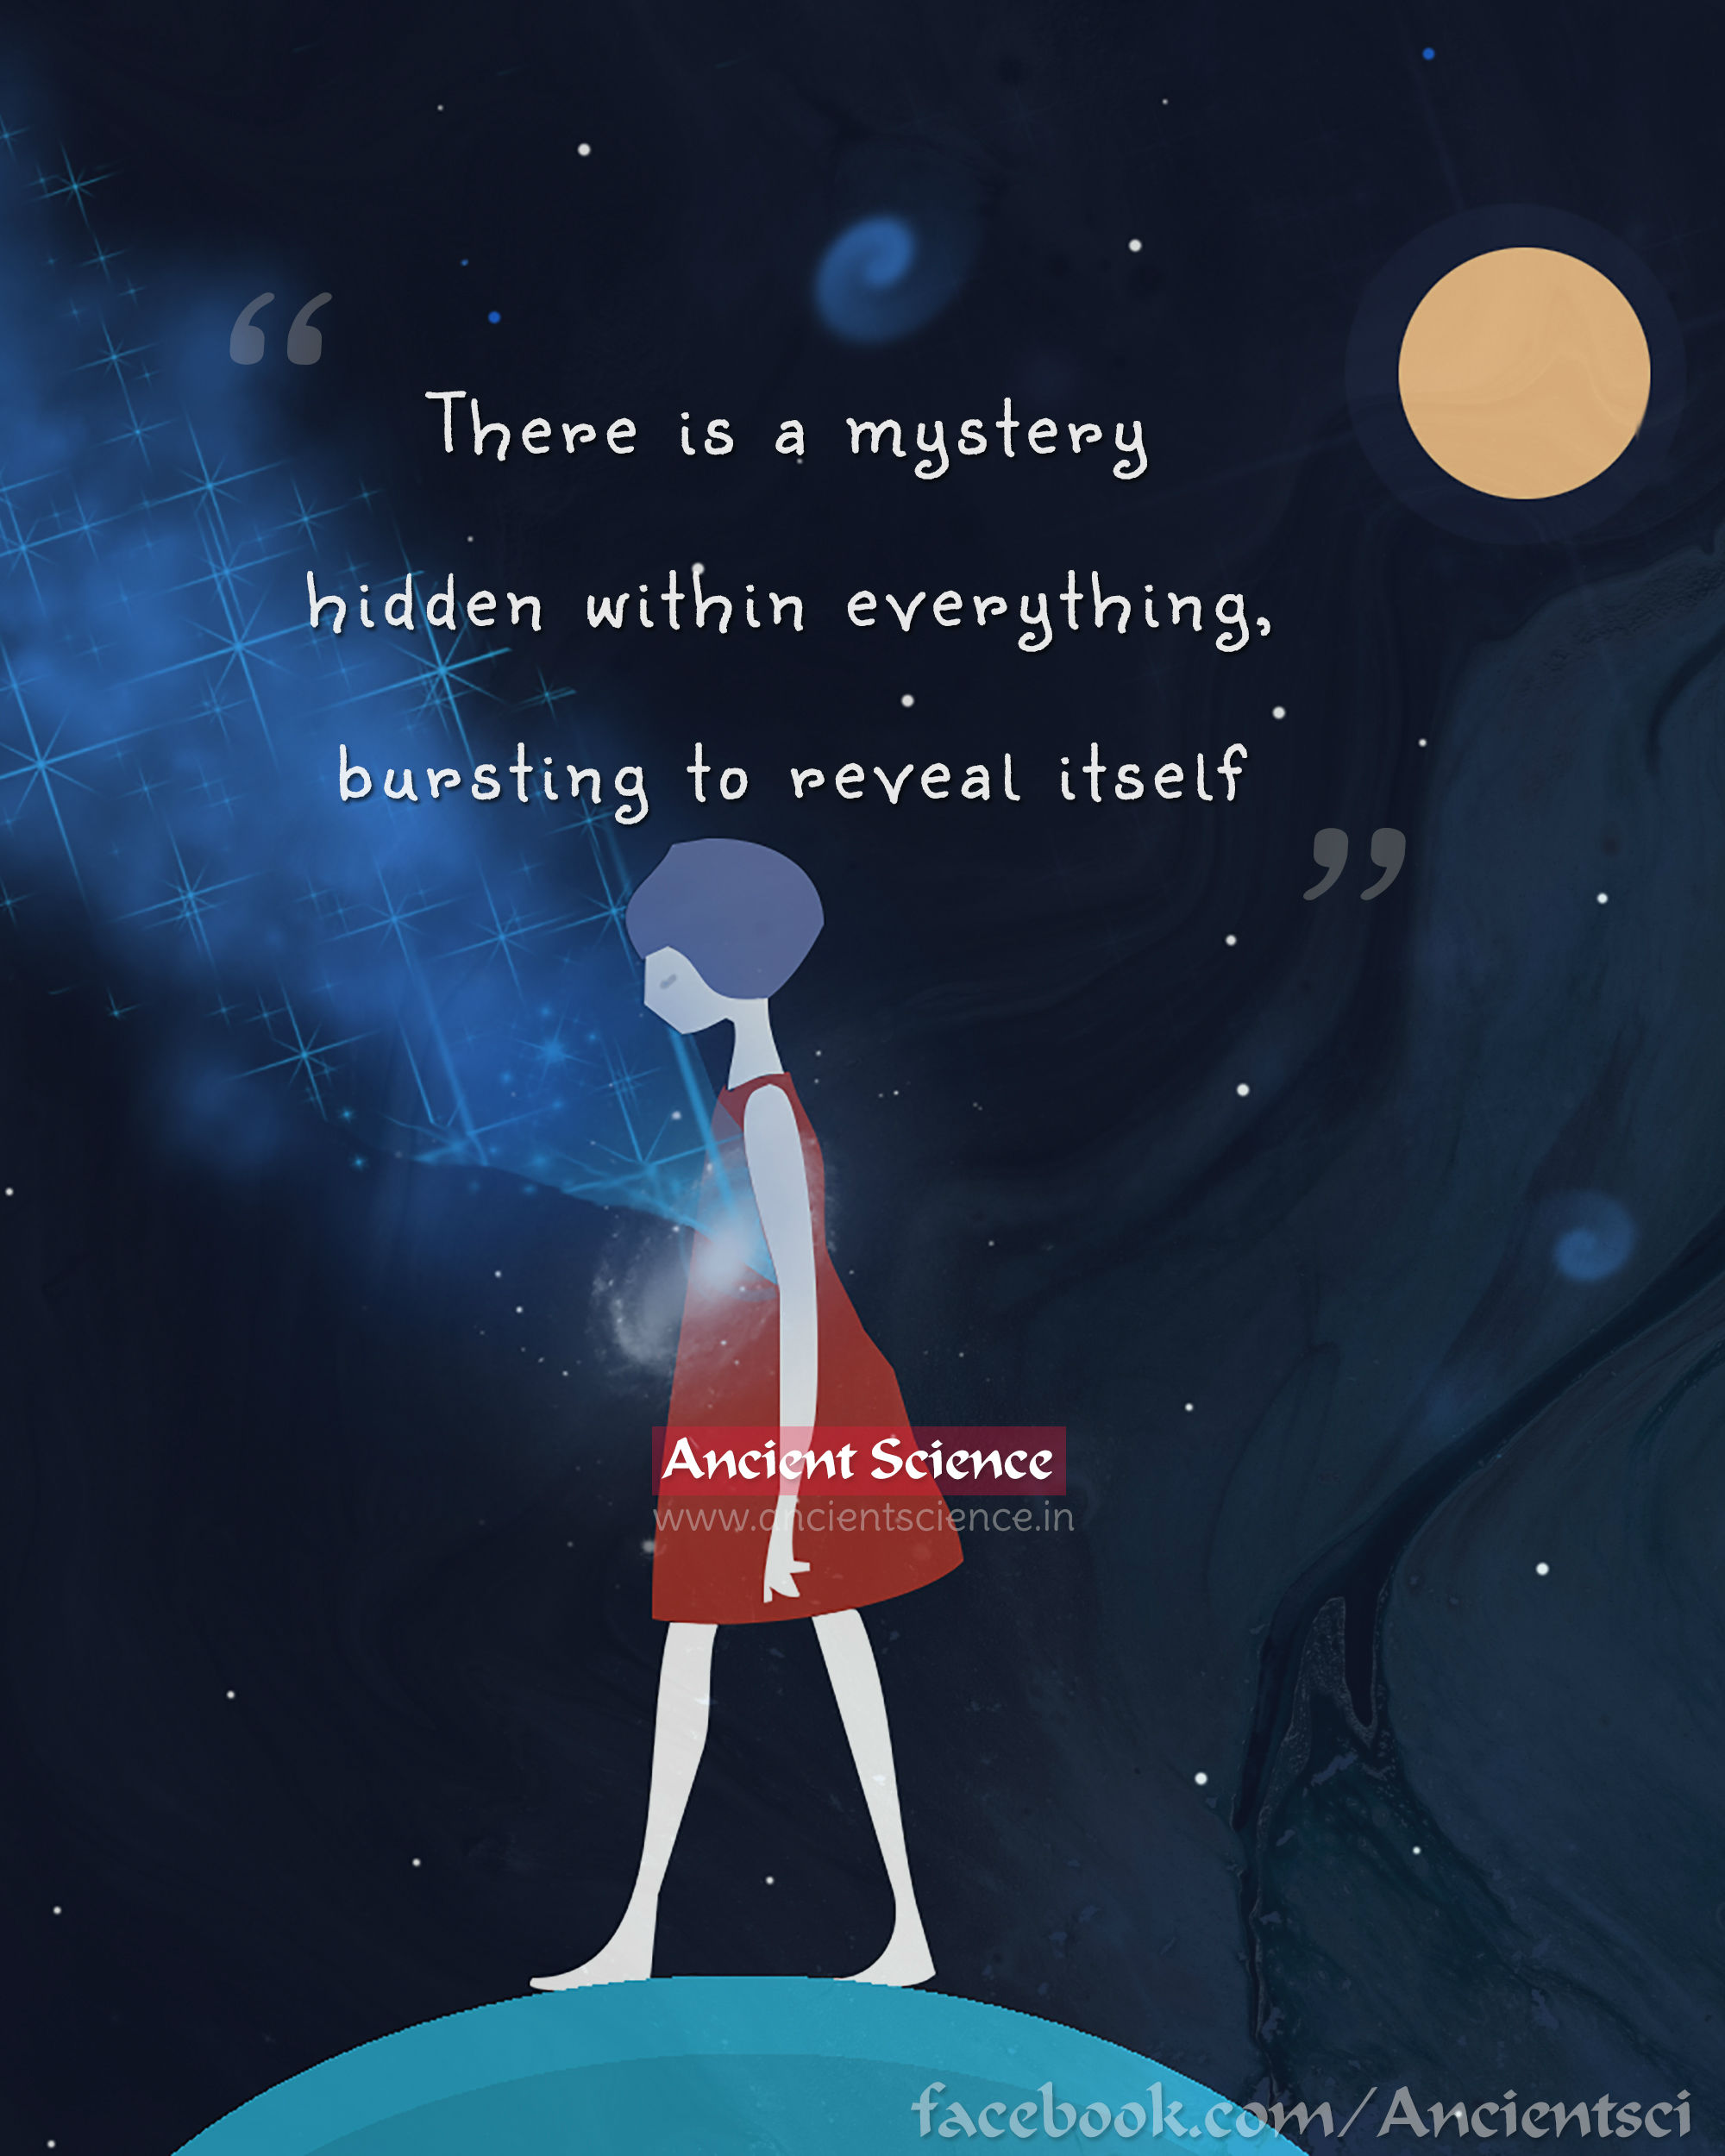 There is a mystery hidden within everything bursting to reveal itself.